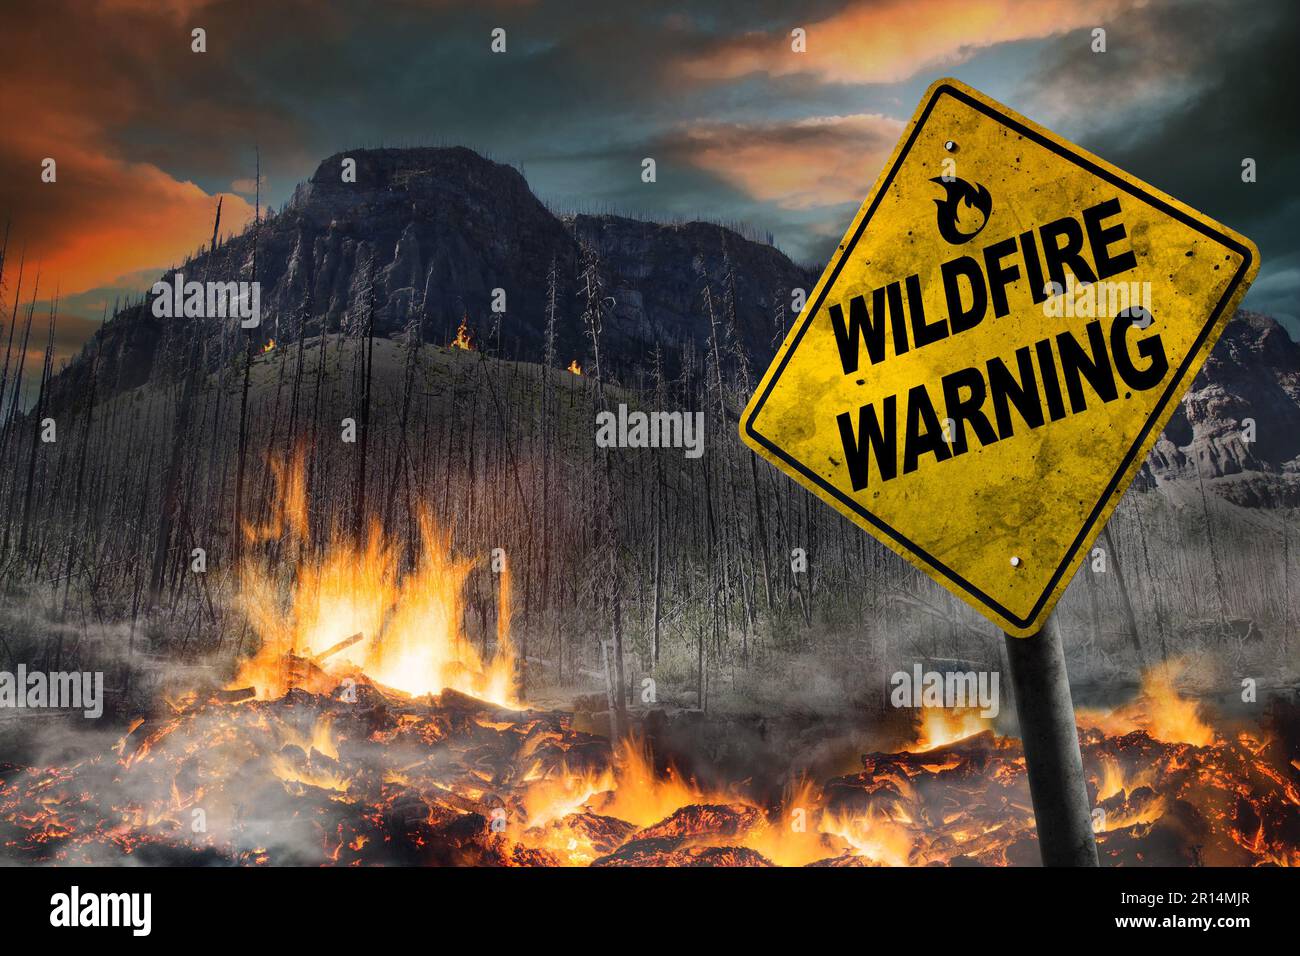 Wildfire warning sign against a forest fire background with burnt trees and vegetation landscape. Dirty and angled sign adds to the drama. Stock Photo